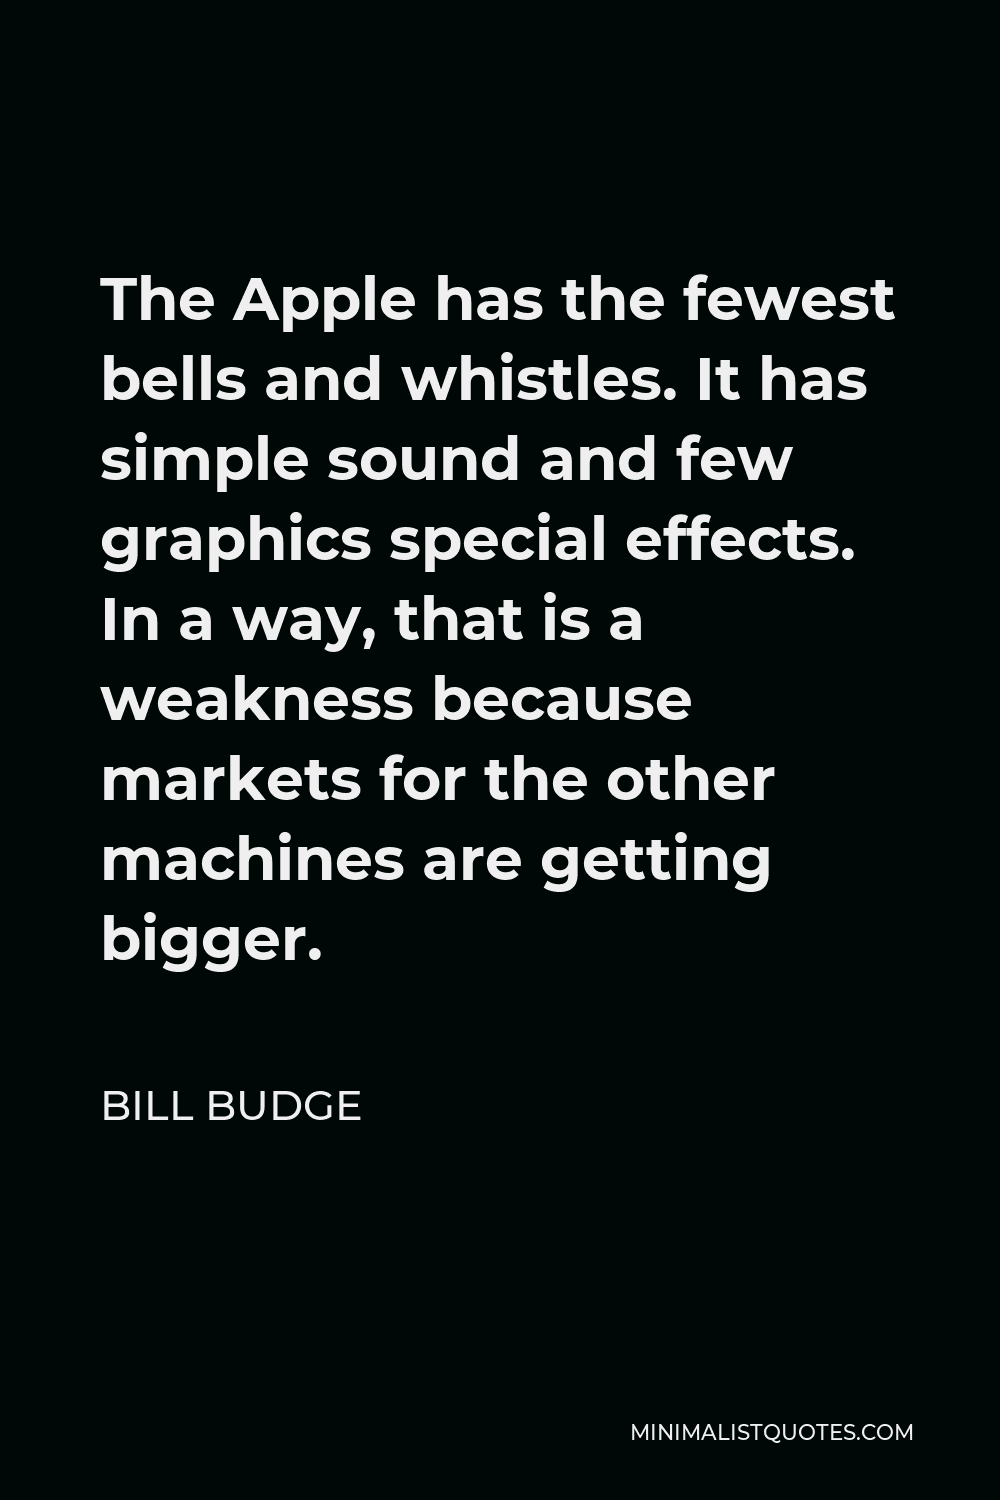 Bill Budge Quote - The Apple has the fewest bells and whistles. It has simple sound and few graphics special effects. In a way, that is a weakness because markets for the other machines are getting bigger.